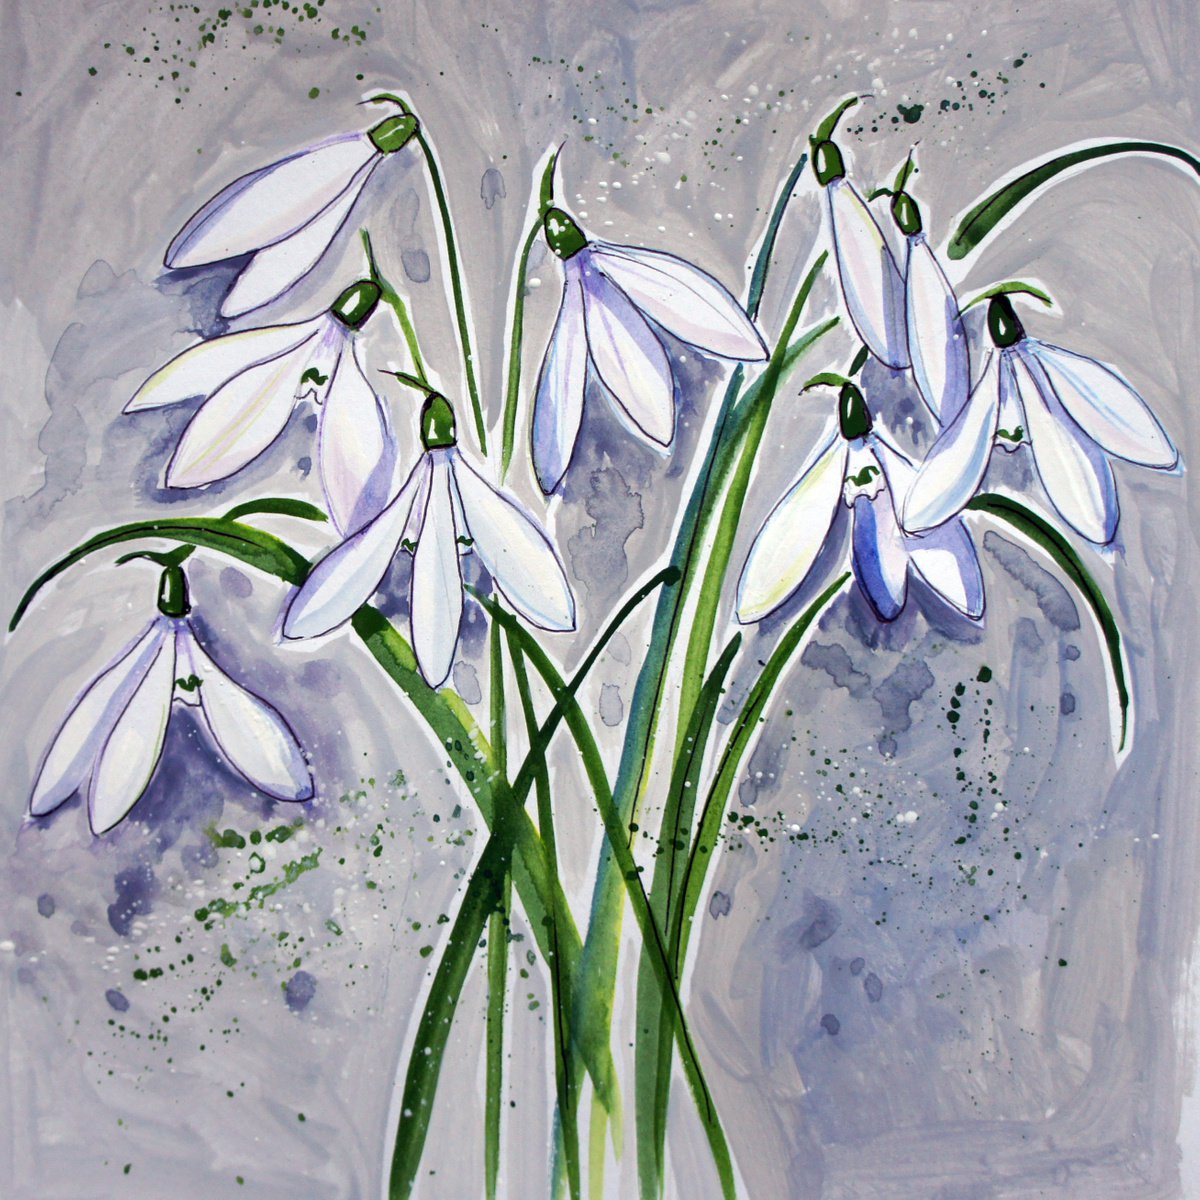 First Snowdrops by Julia Rigby